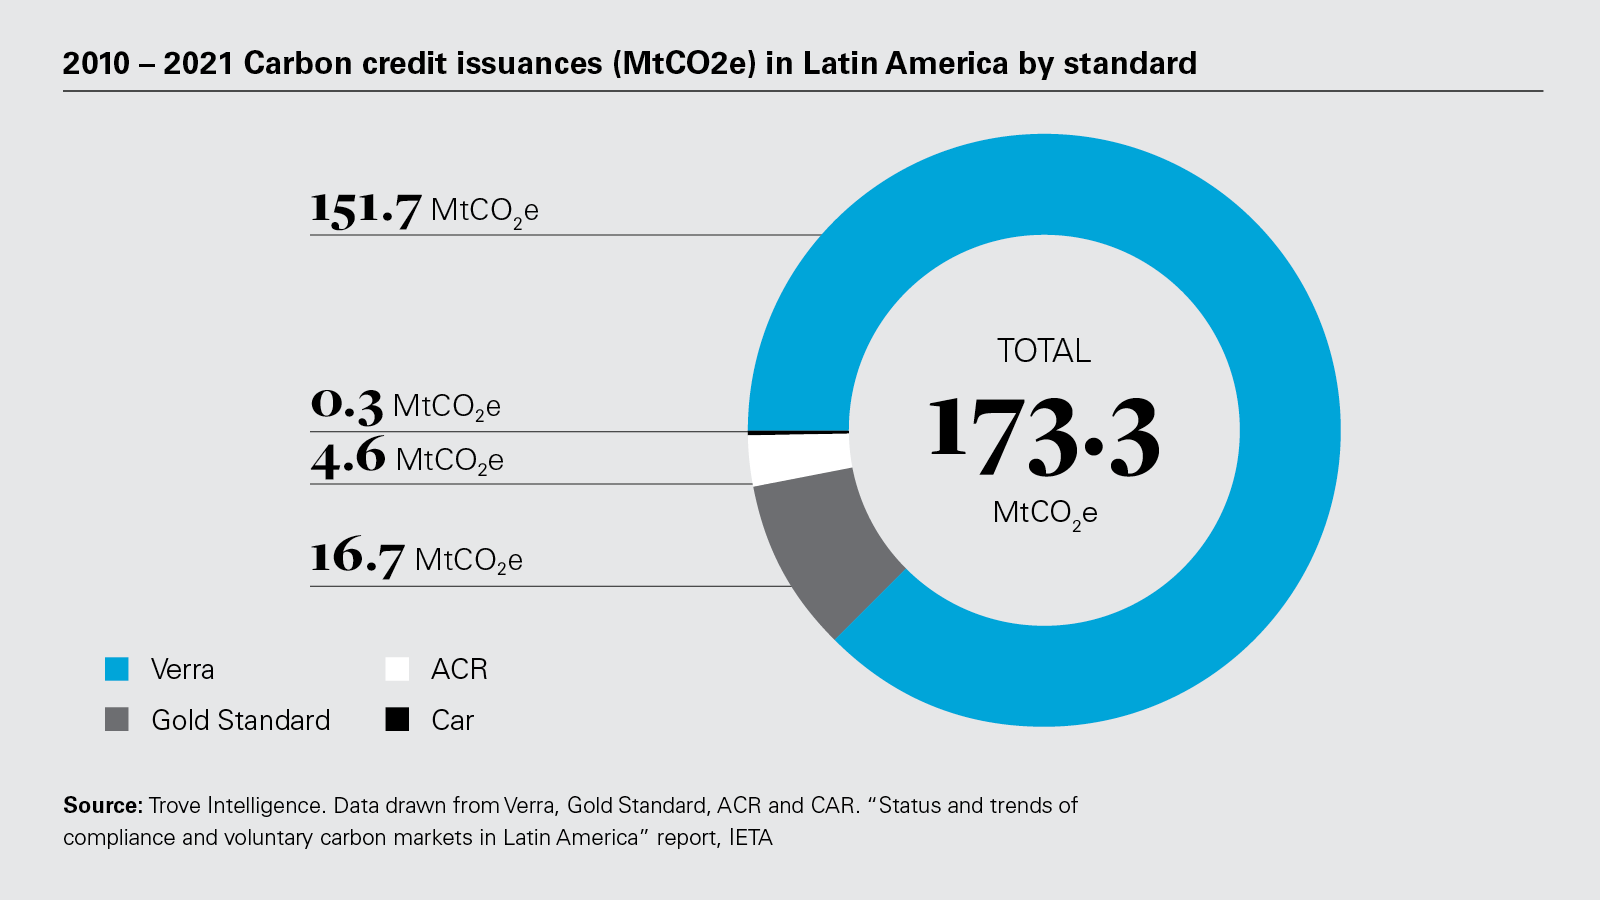 2010 – 2021 Carbon credit issuances (MtCO2e) in Latin America by standard